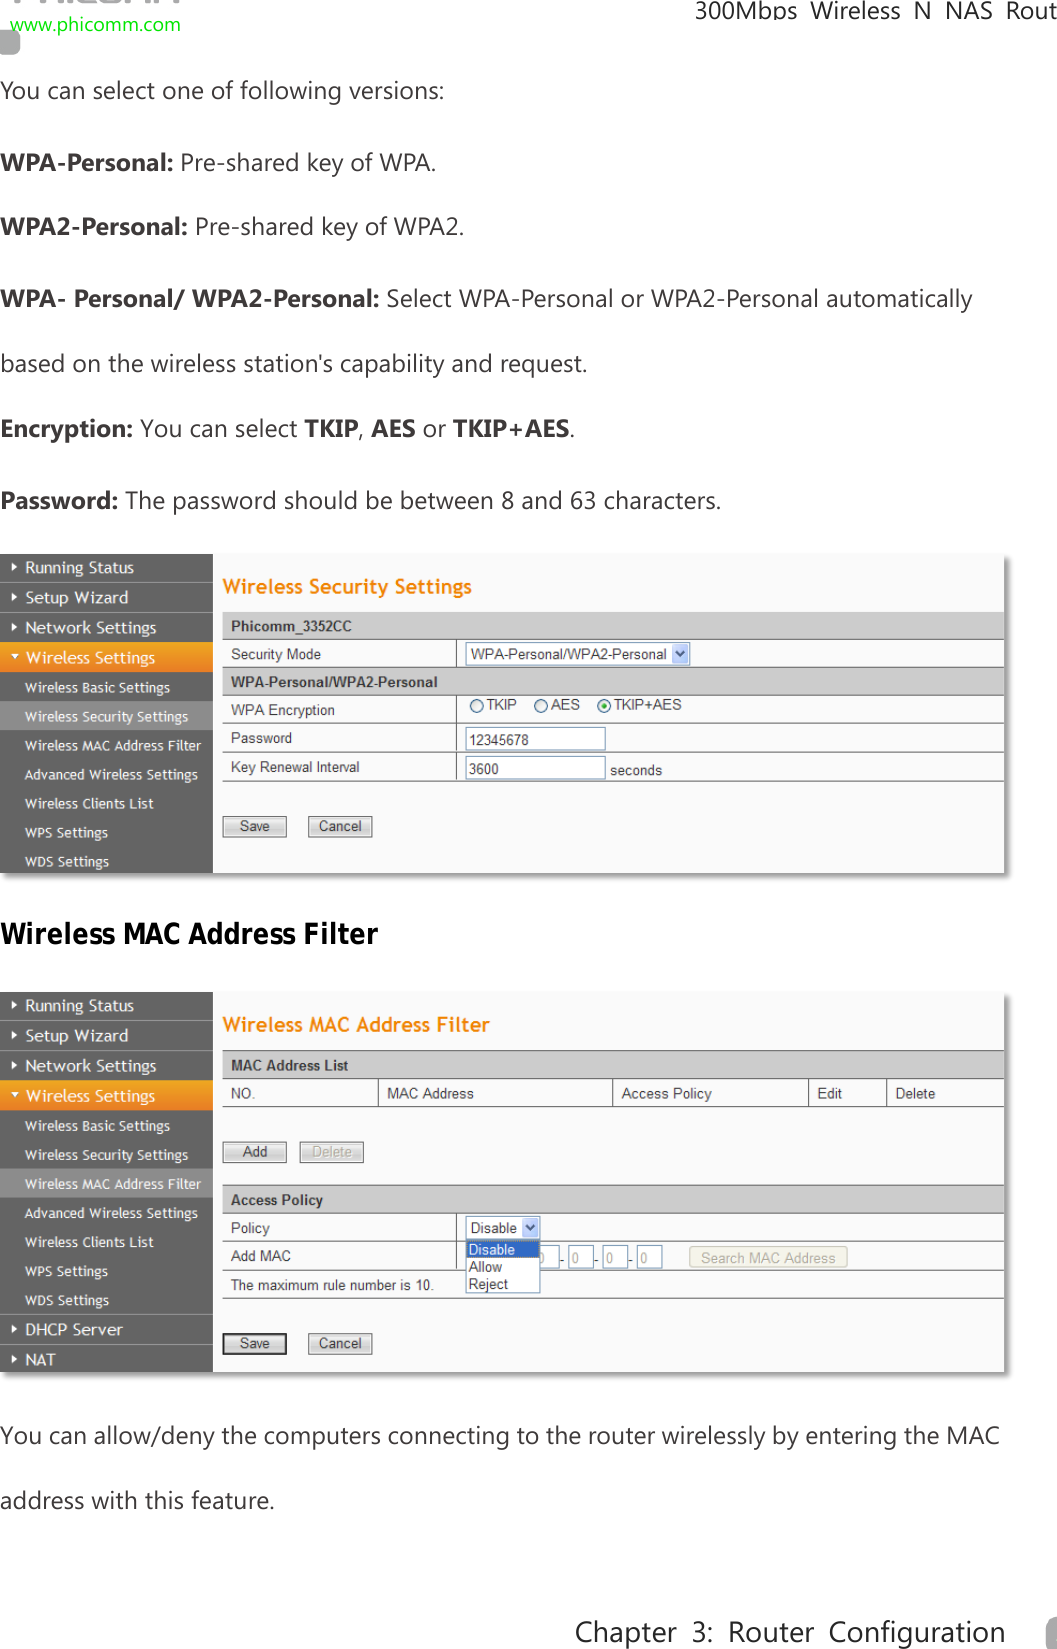                                                            300Mbps Wireless N NAS  Rout www.phicomm.com 27 Chapter 3: Router Configuration  You can select one of following versions: WPA-Personal: Pre-shared key of WPA. WPA2-Personal: Pre-shared key of WPA2.   WPA- Personal/ WPA2-Personal: Select WPA-Personal or WPA2-Personal automatically based on the wireless station&apos;s capability and request. Encryption: You can select TKIP, AES or TKIP+AES. Password: The password should be between 8 and 63 characters.  Wireless MAC Address Filter    You can allow/deny the computers connecting to the router wirelessly by entering the MAC address with this feature. 